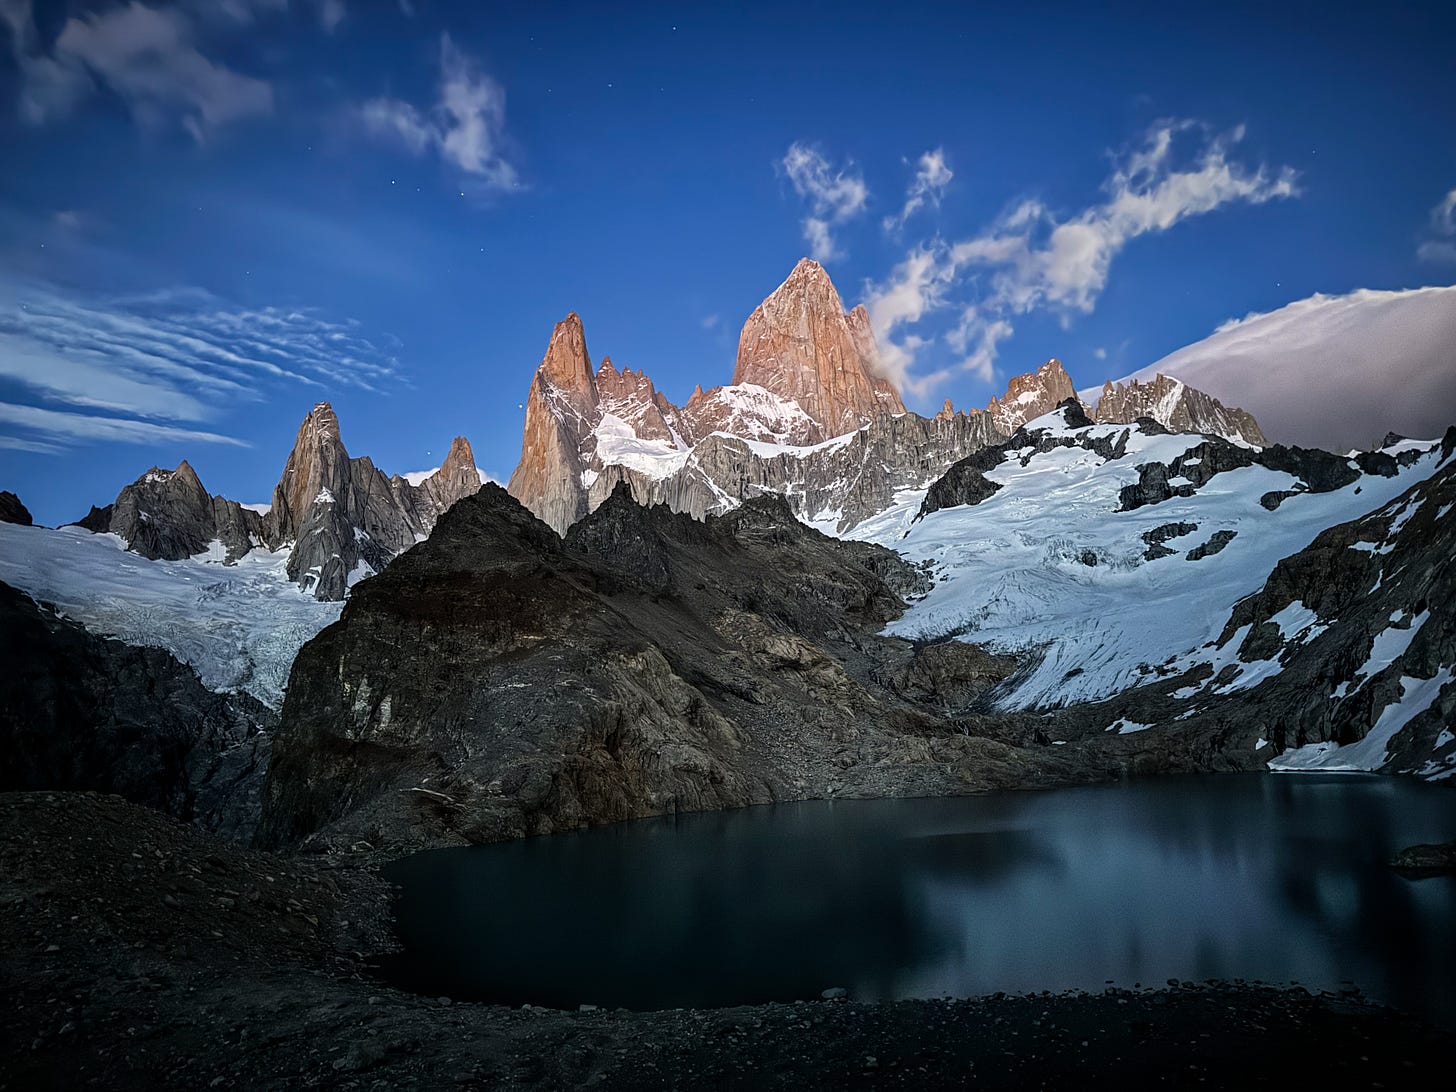 A line of granite towers rises up against a lightening sky. A dark lake is in the foreground, surrounded by white glaciers and smaller granite mountains. There are stars visible in the sky, with some clouds.